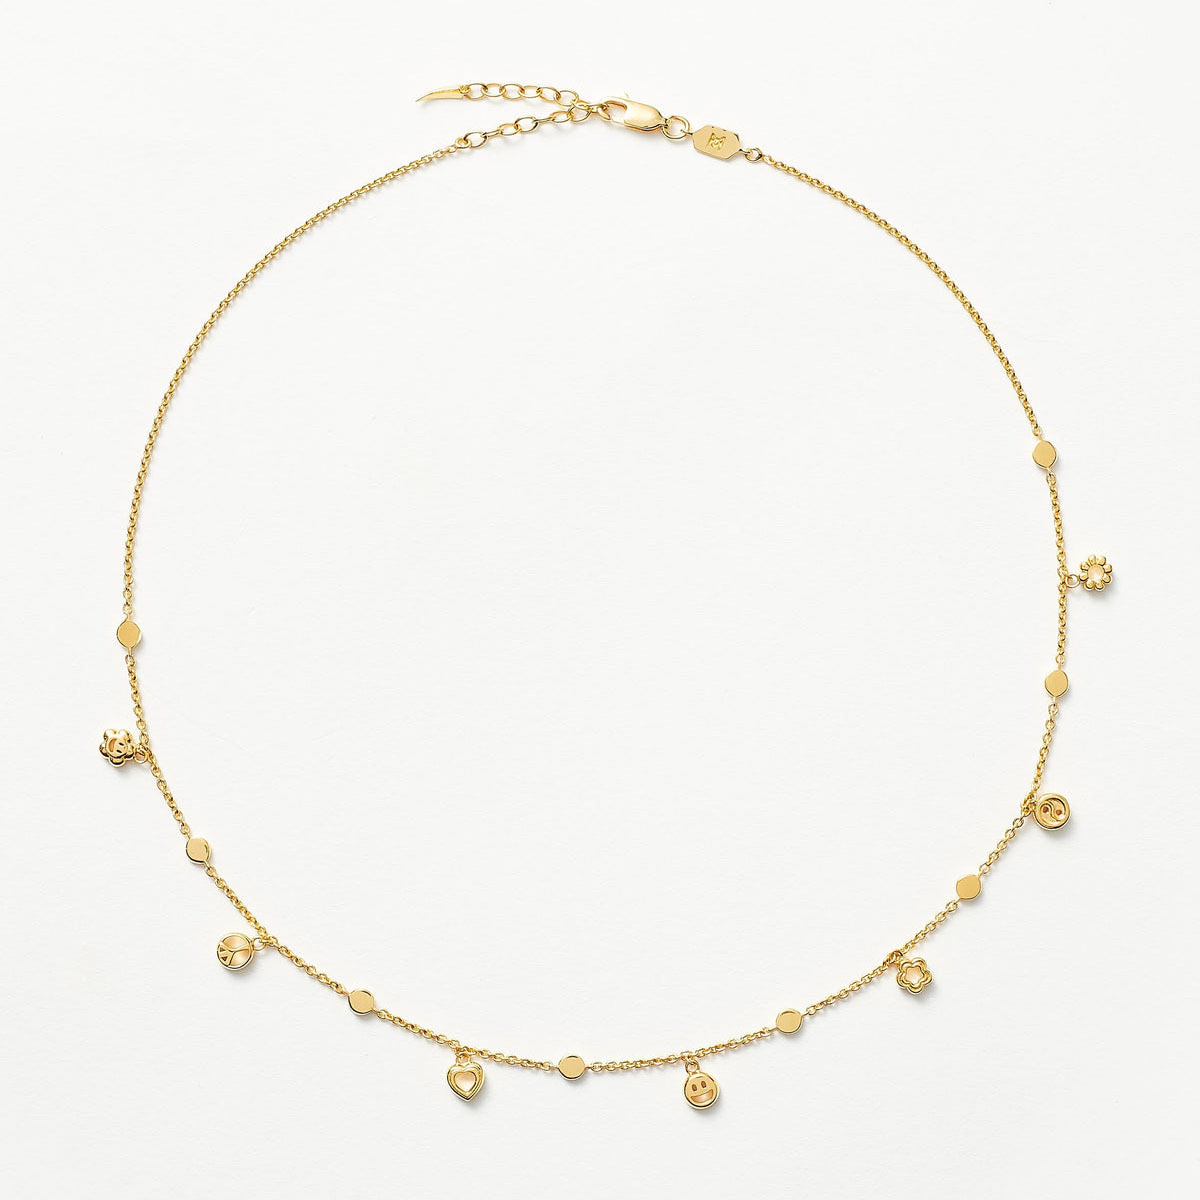 Custom wholesaler jewelry manufacturer made multi charm choker necklaces 18k gold plated vermeil